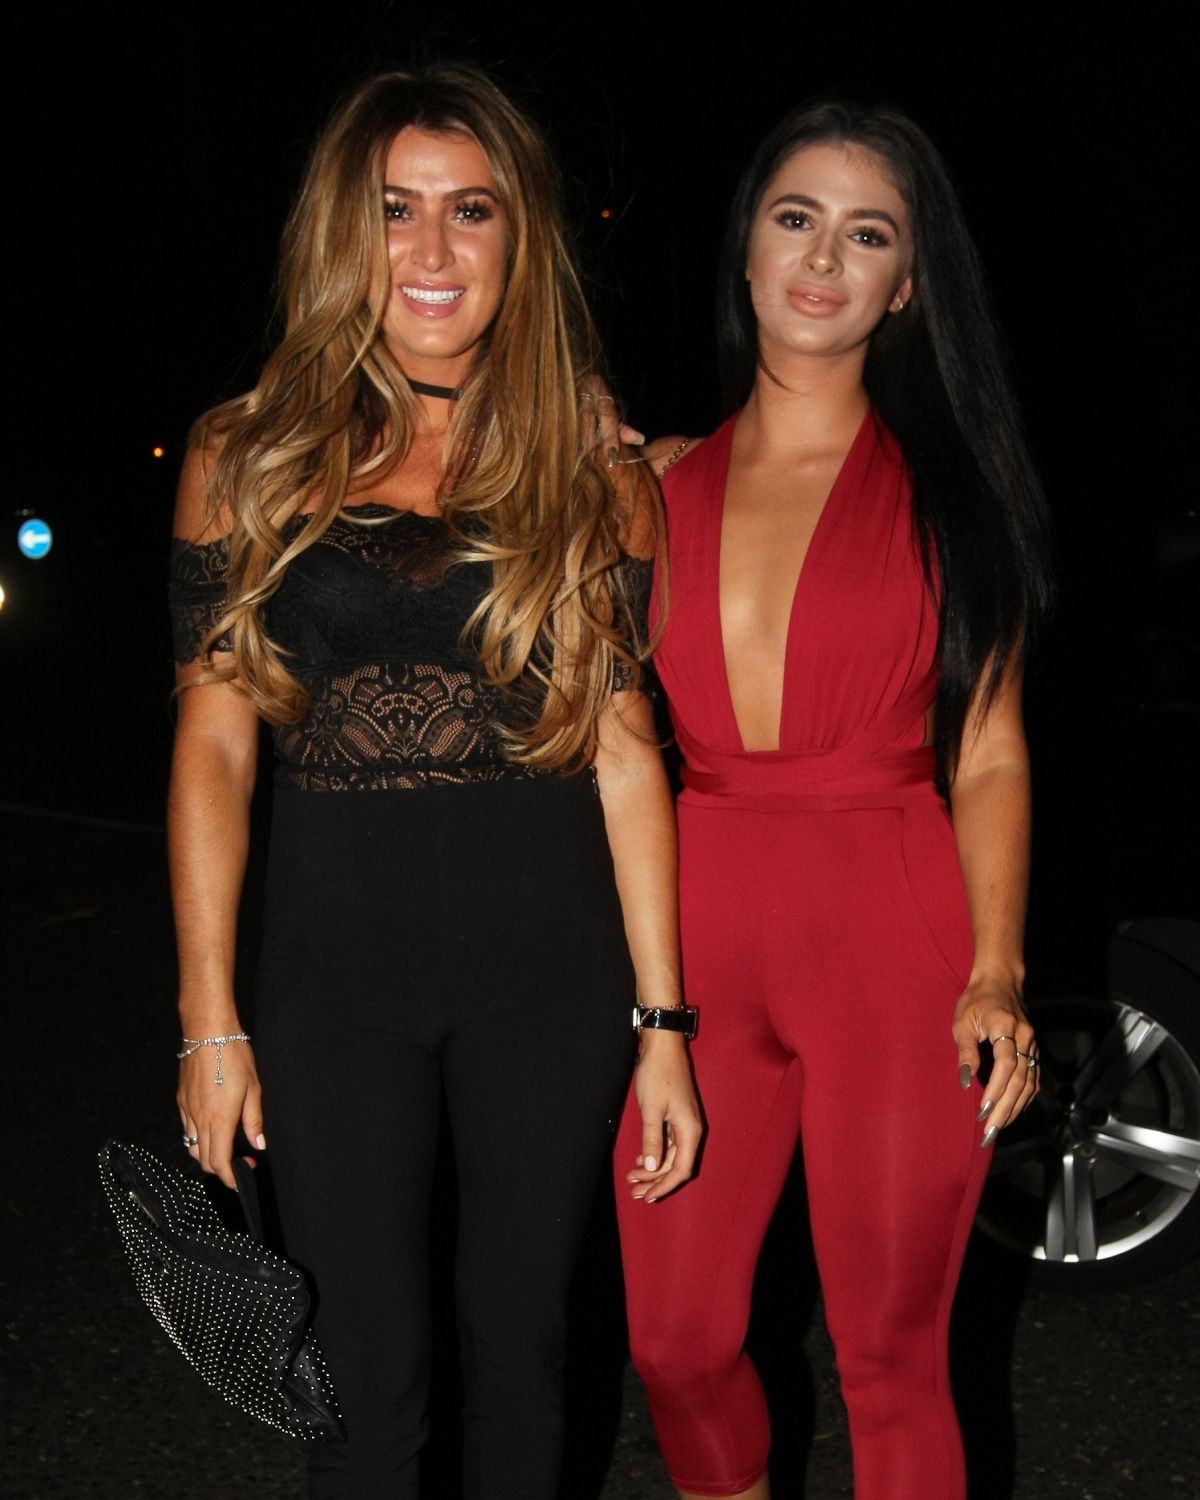 LILLIE LEXIE GREGG and AIMEE KIMBER at Pure Bar in Bexleyheath 10/08/2016